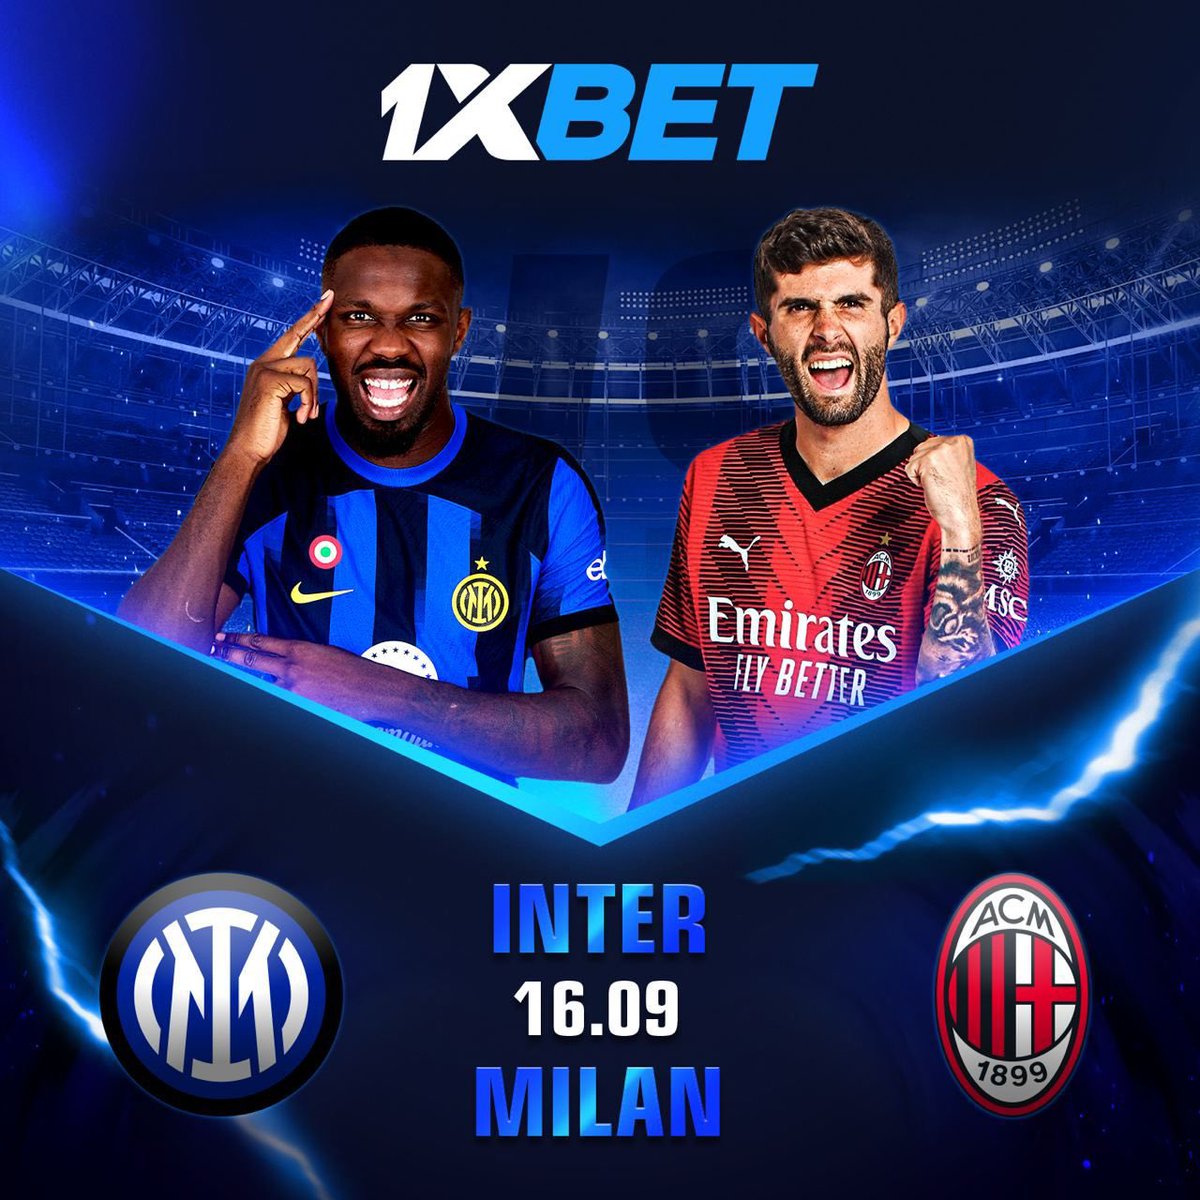 🔵🔴Stunning Milan Derby

Make your choice and enjoy these great teams with 1xBet!

Using the link ➡️ bit.ly/447KINS and promo code: FRANKCUTEX for bonus on your win ⚽️